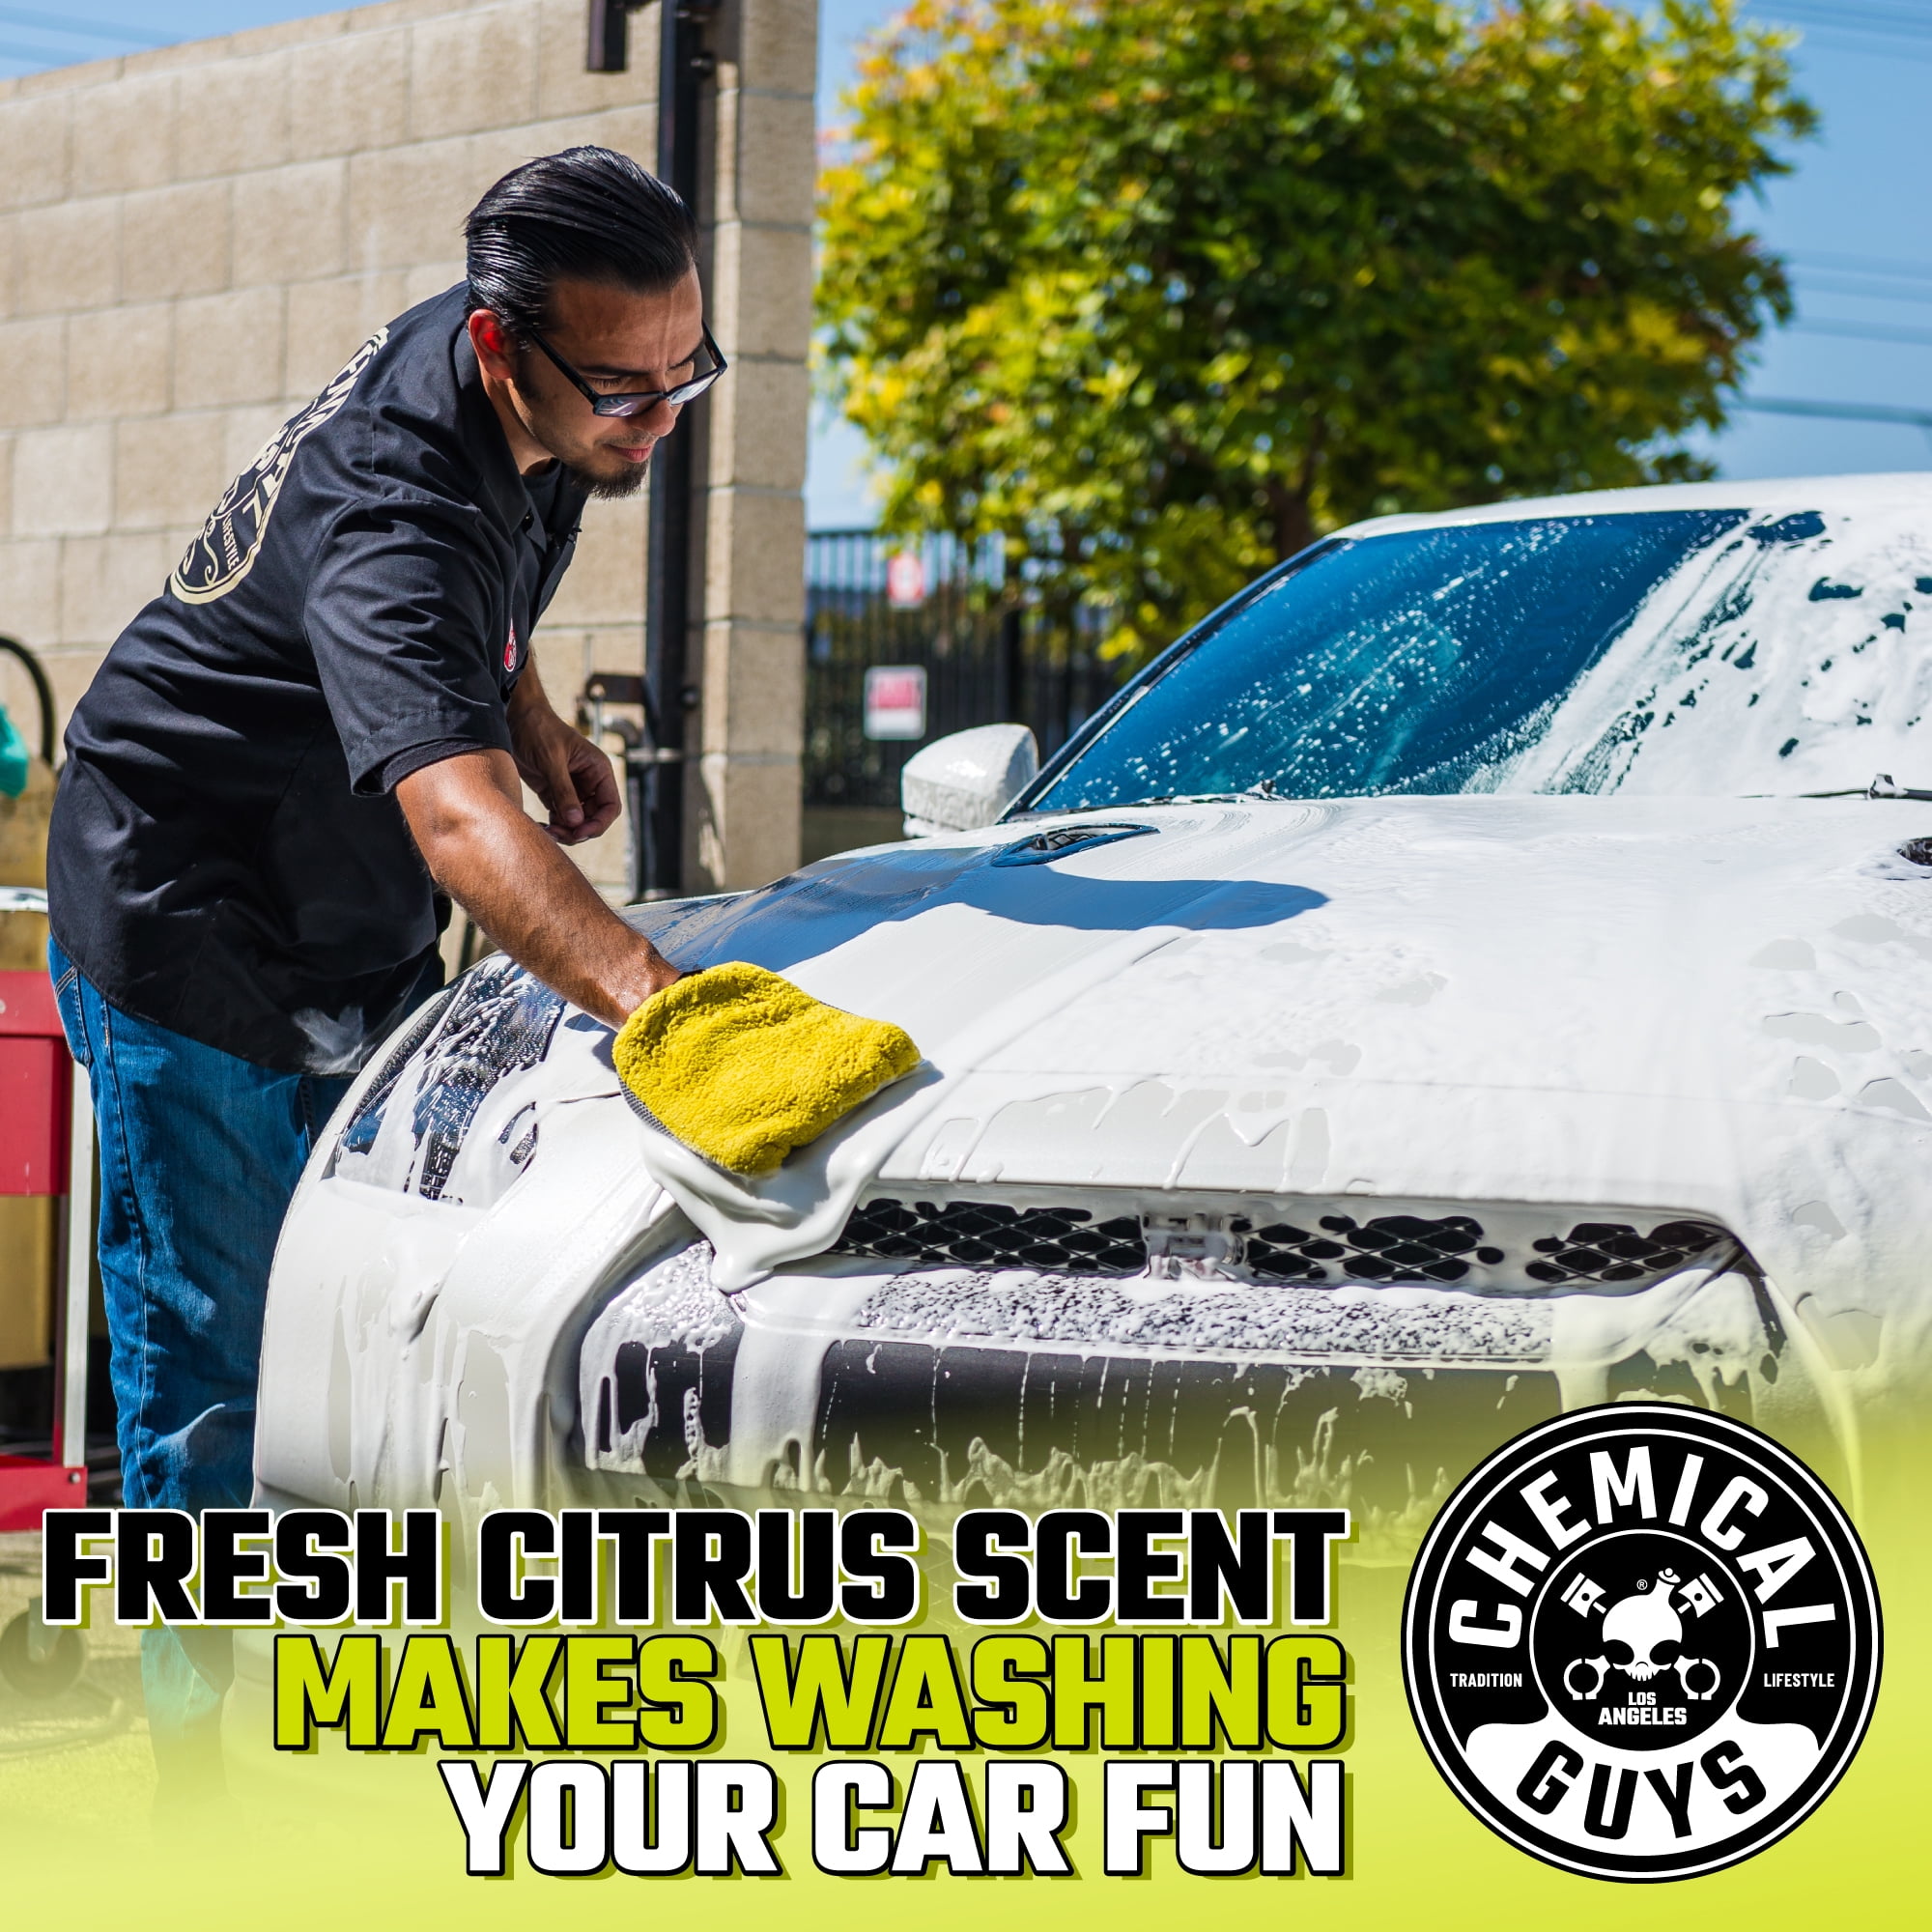 Chemical Guys on Instagram: Visit us and get your first month FREE! Take  your car wash to the next level with Chemical Guys Car Wash in Lakewood,  CA. After decades of innovating